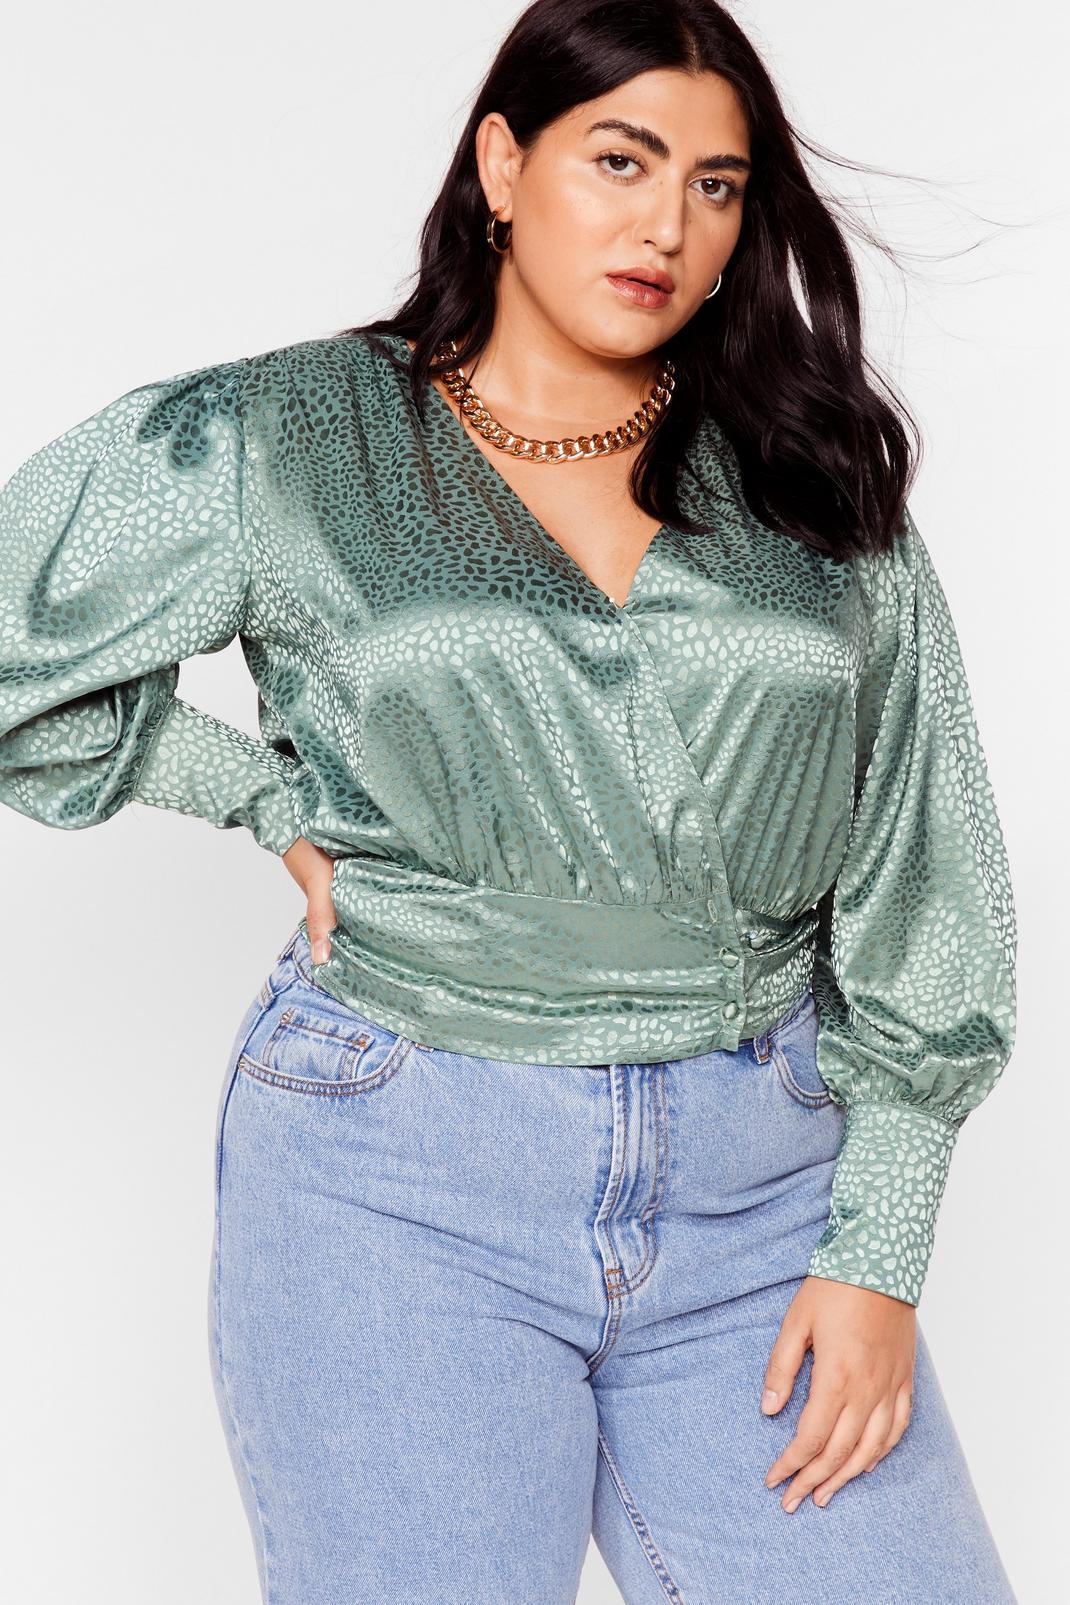 Sage Let's Wrap Things Up Plus Size Jacquard Top image number 1